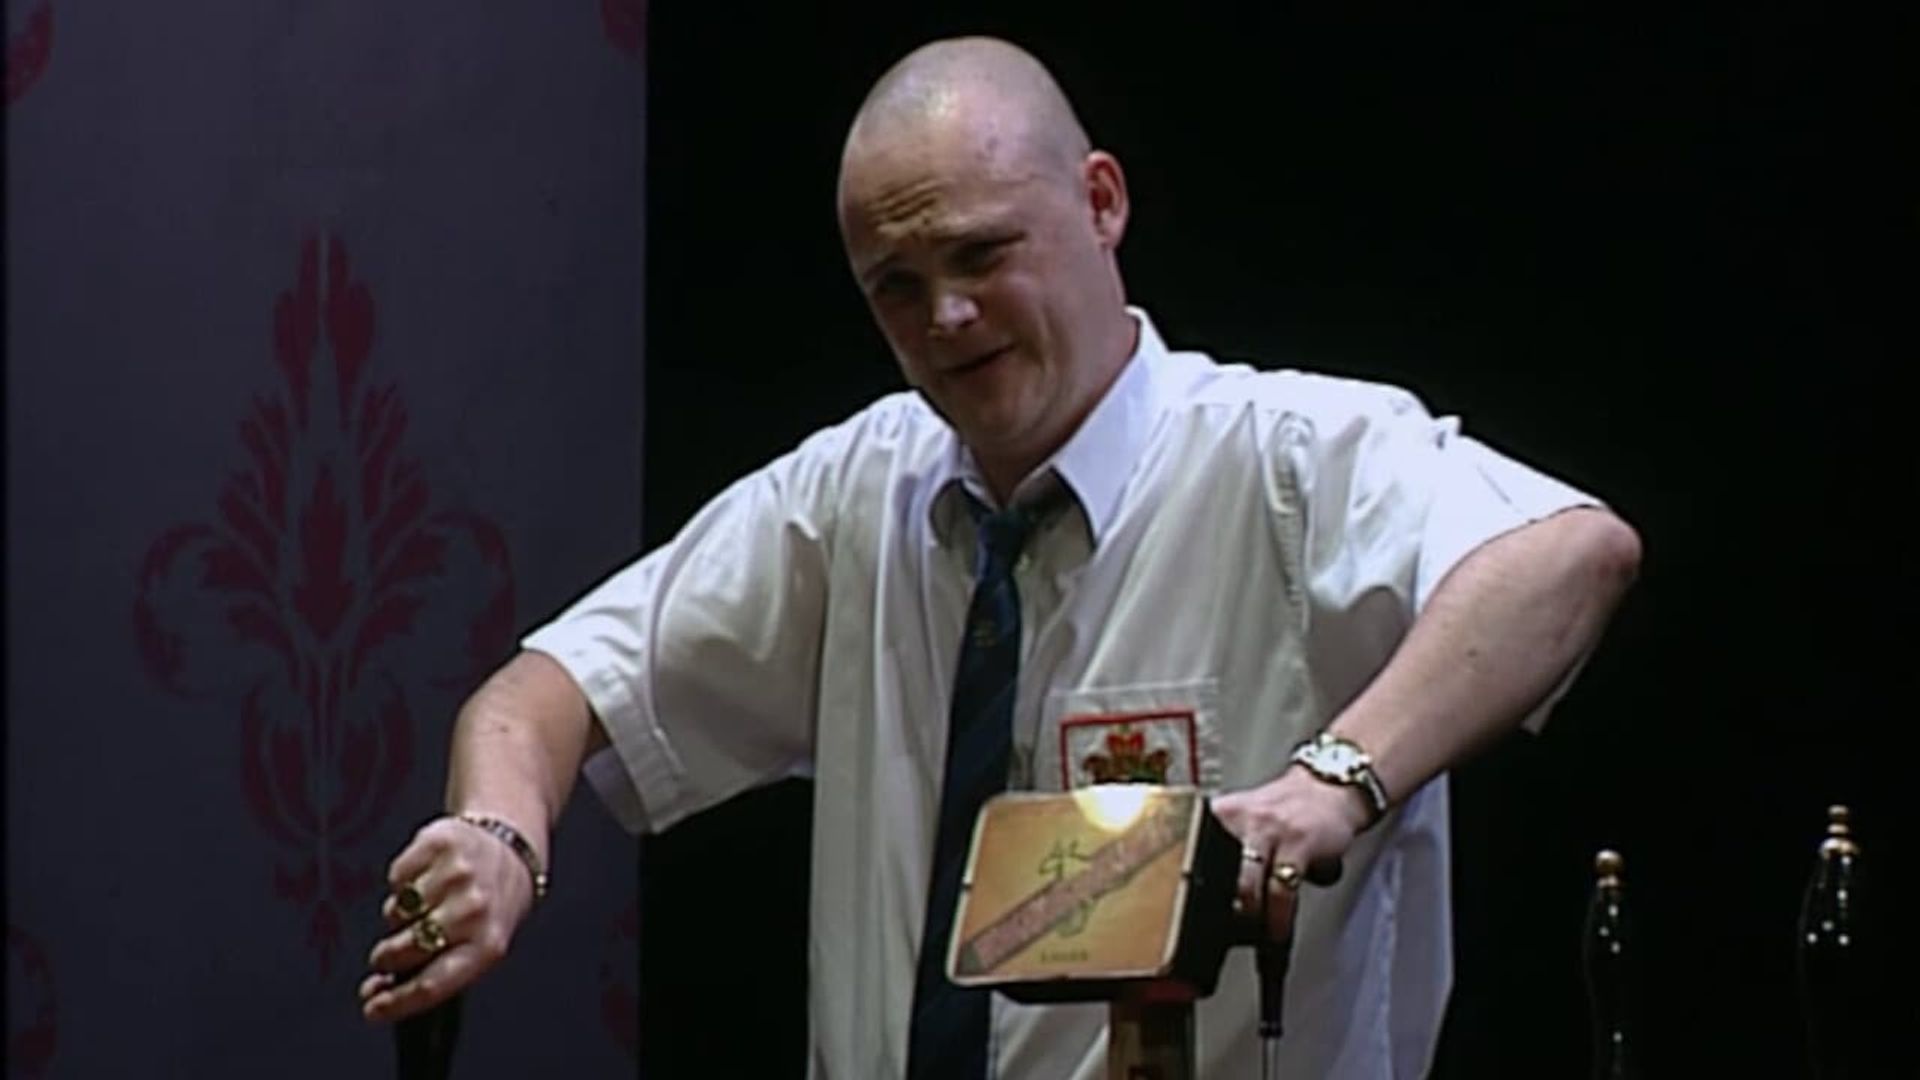 Al Murray: The Pub Landlord Live - My Gaff, My Rules background